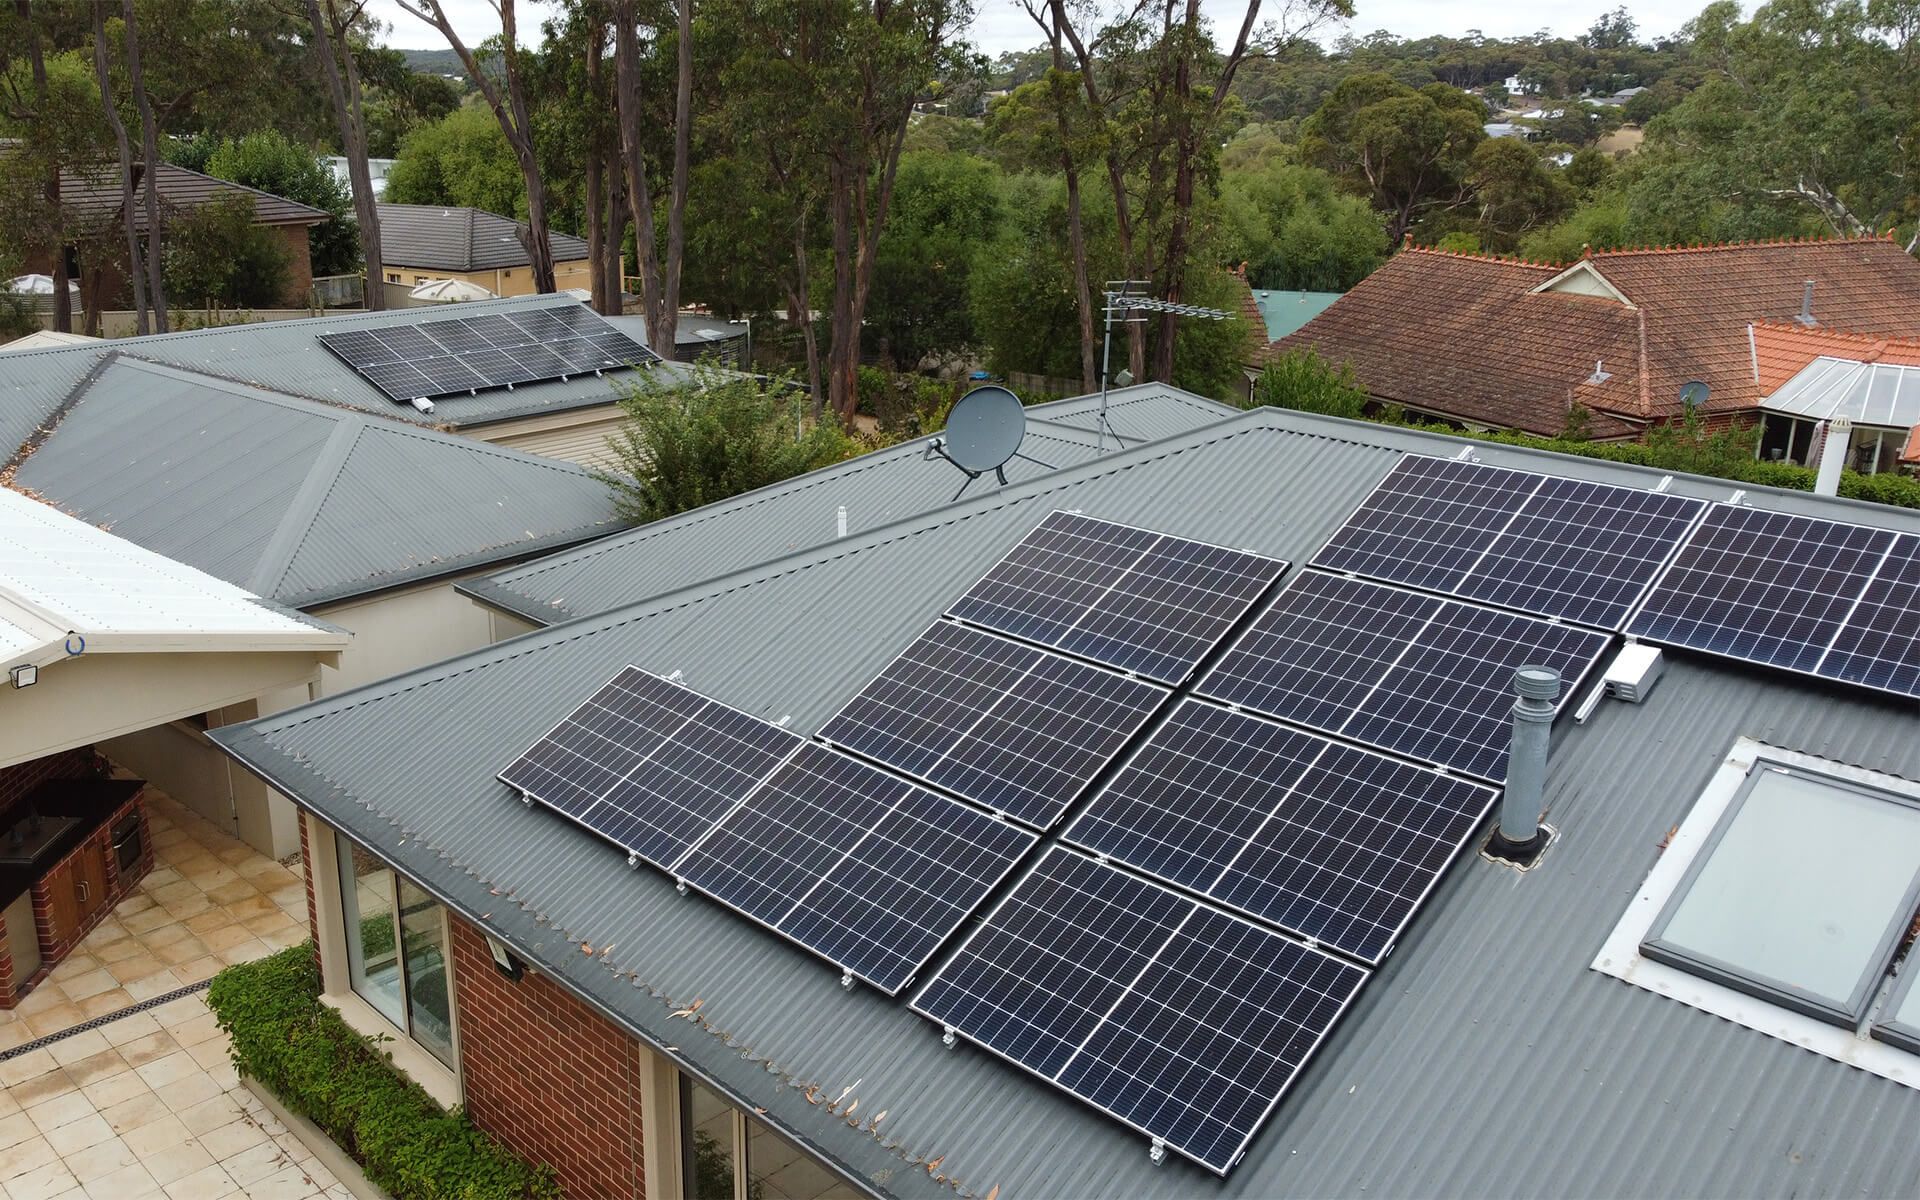 Buninyong: 7.2KW of Microinverters, 8.2KW PV & 15KWh Battery with up to 11.52KW Continuous Operating